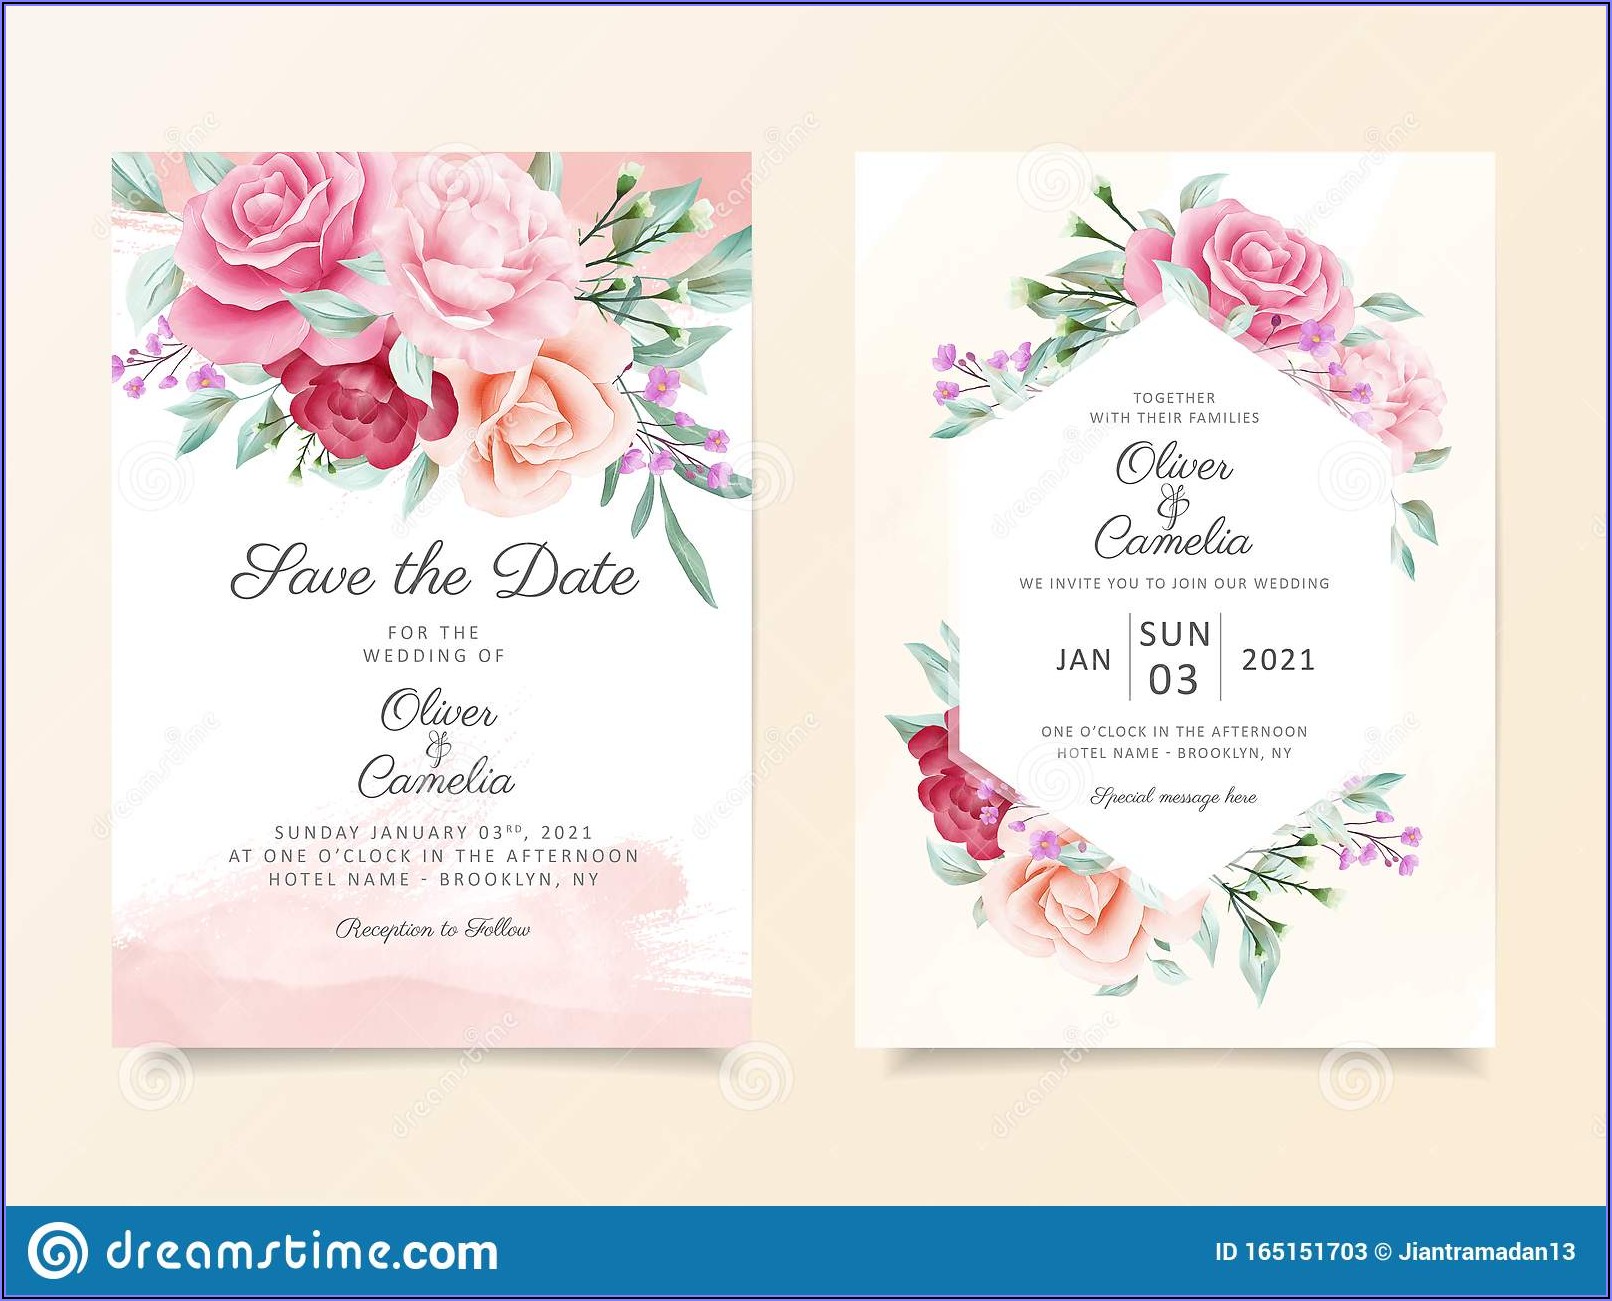 Wedding Invitation With Watercolor Flowers